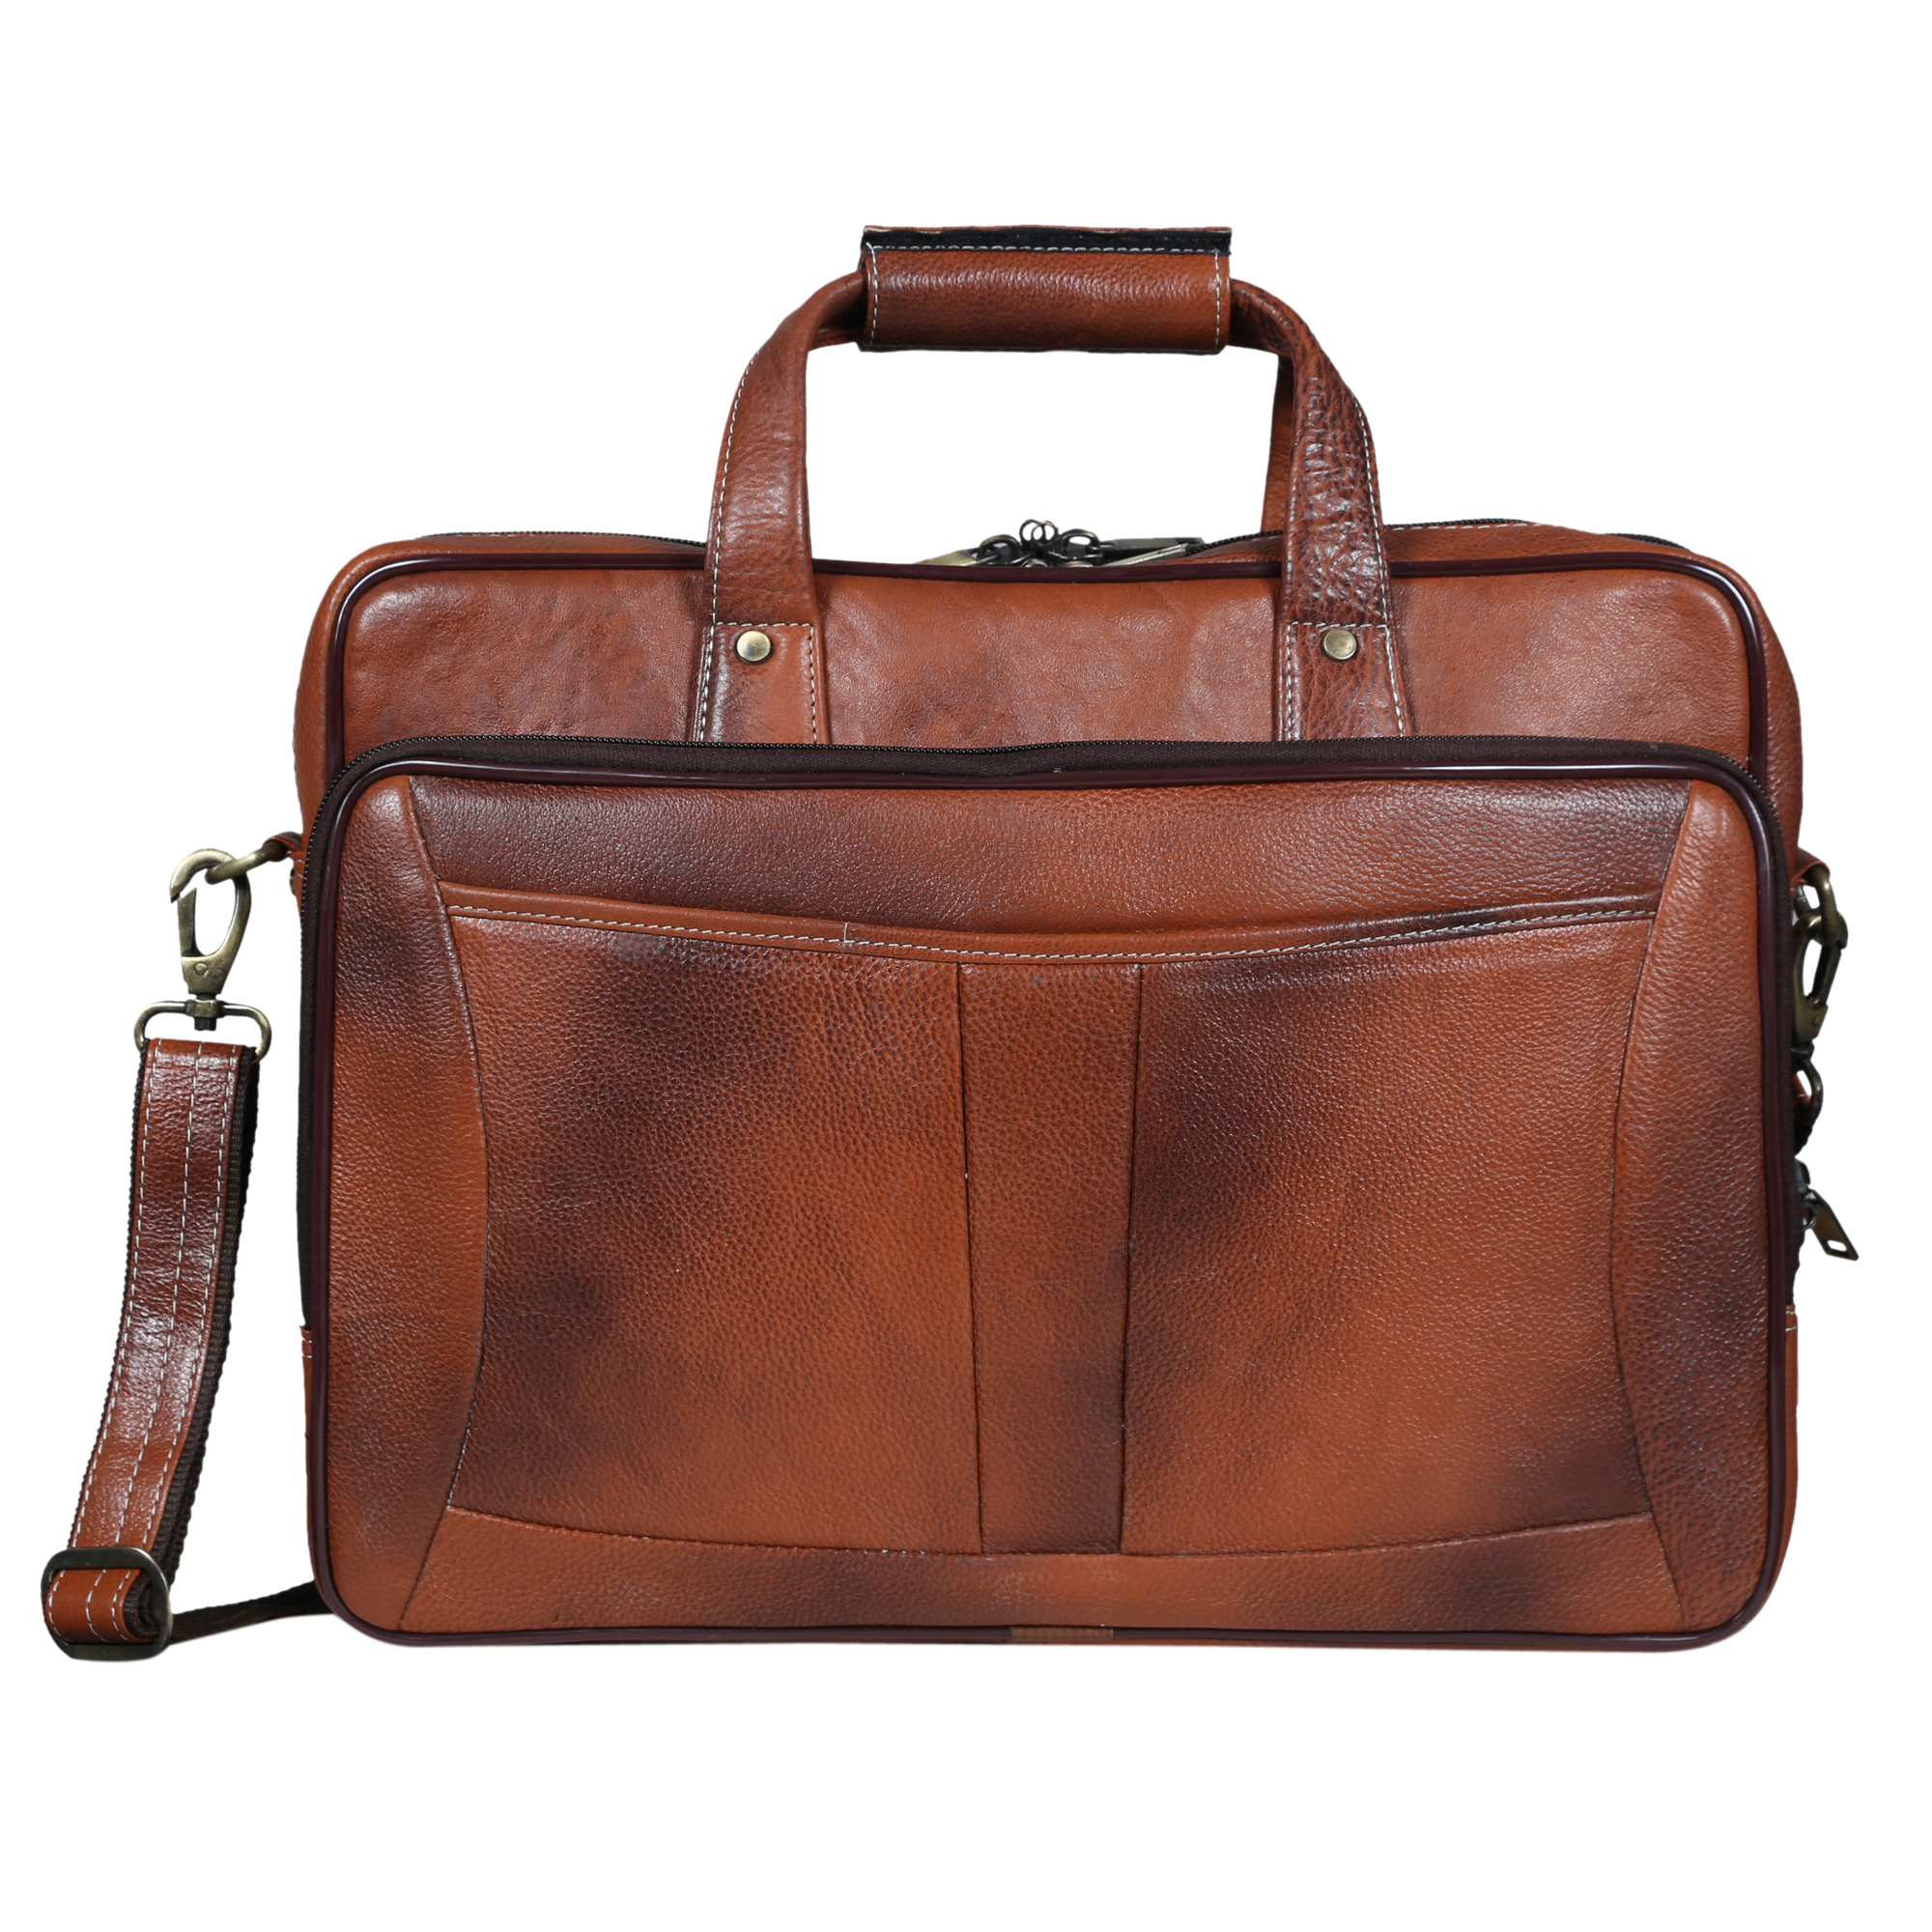 Corporate Laptop Leather Bag Bulk Deal at Marketplace for Leather Goods